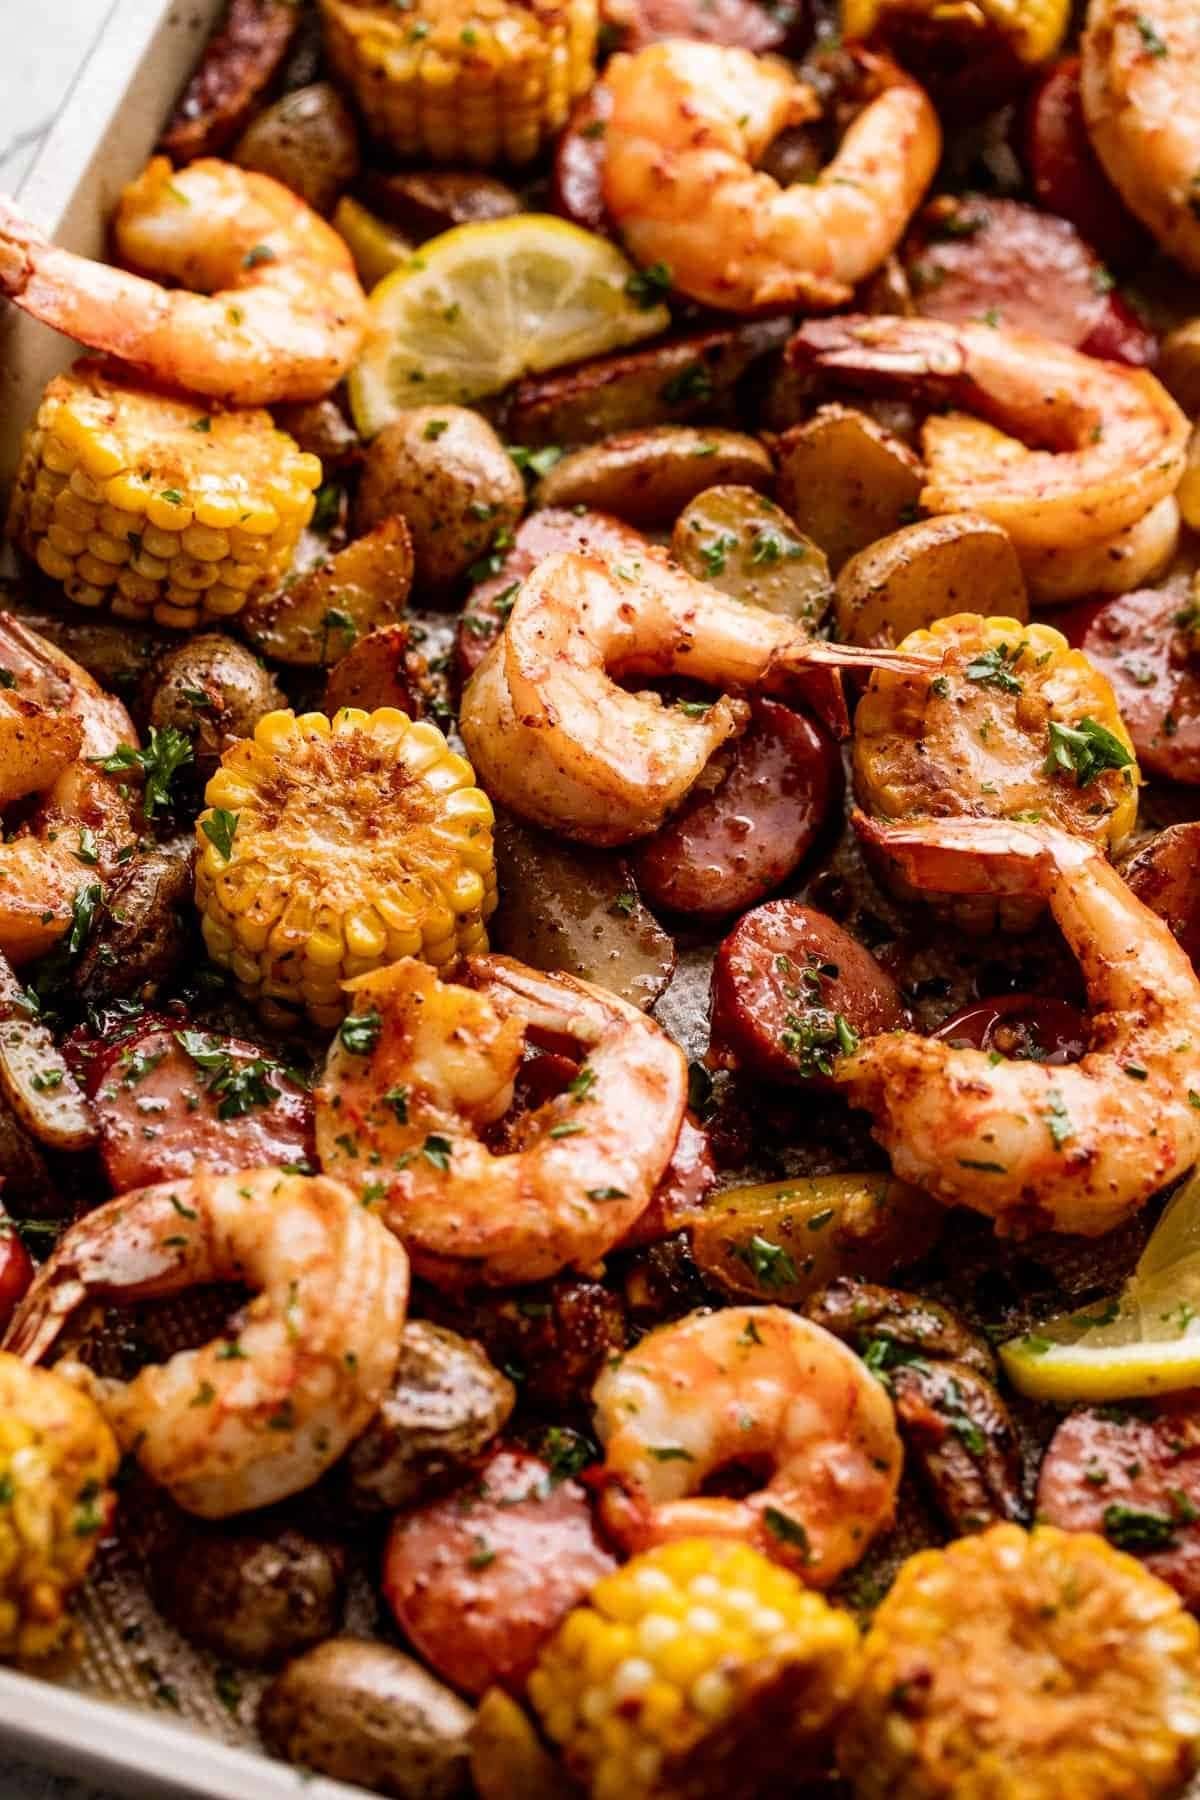 Shrimp broil with corn, potatoes, and sausage cooked in a sheet pan.